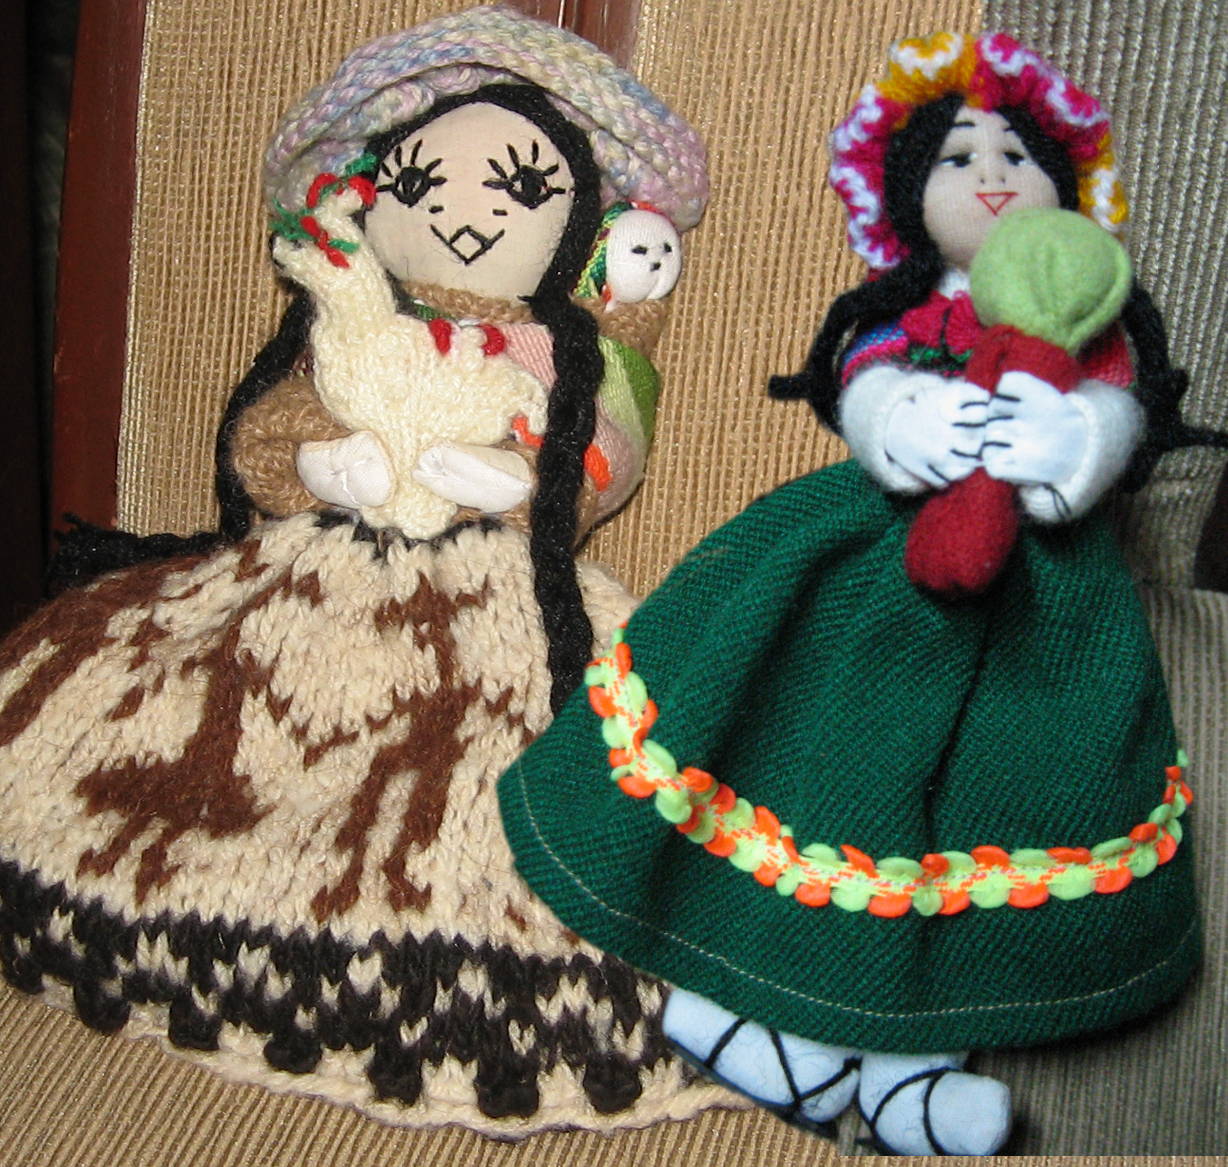 Knitted dolls that I purchased in Arequipa